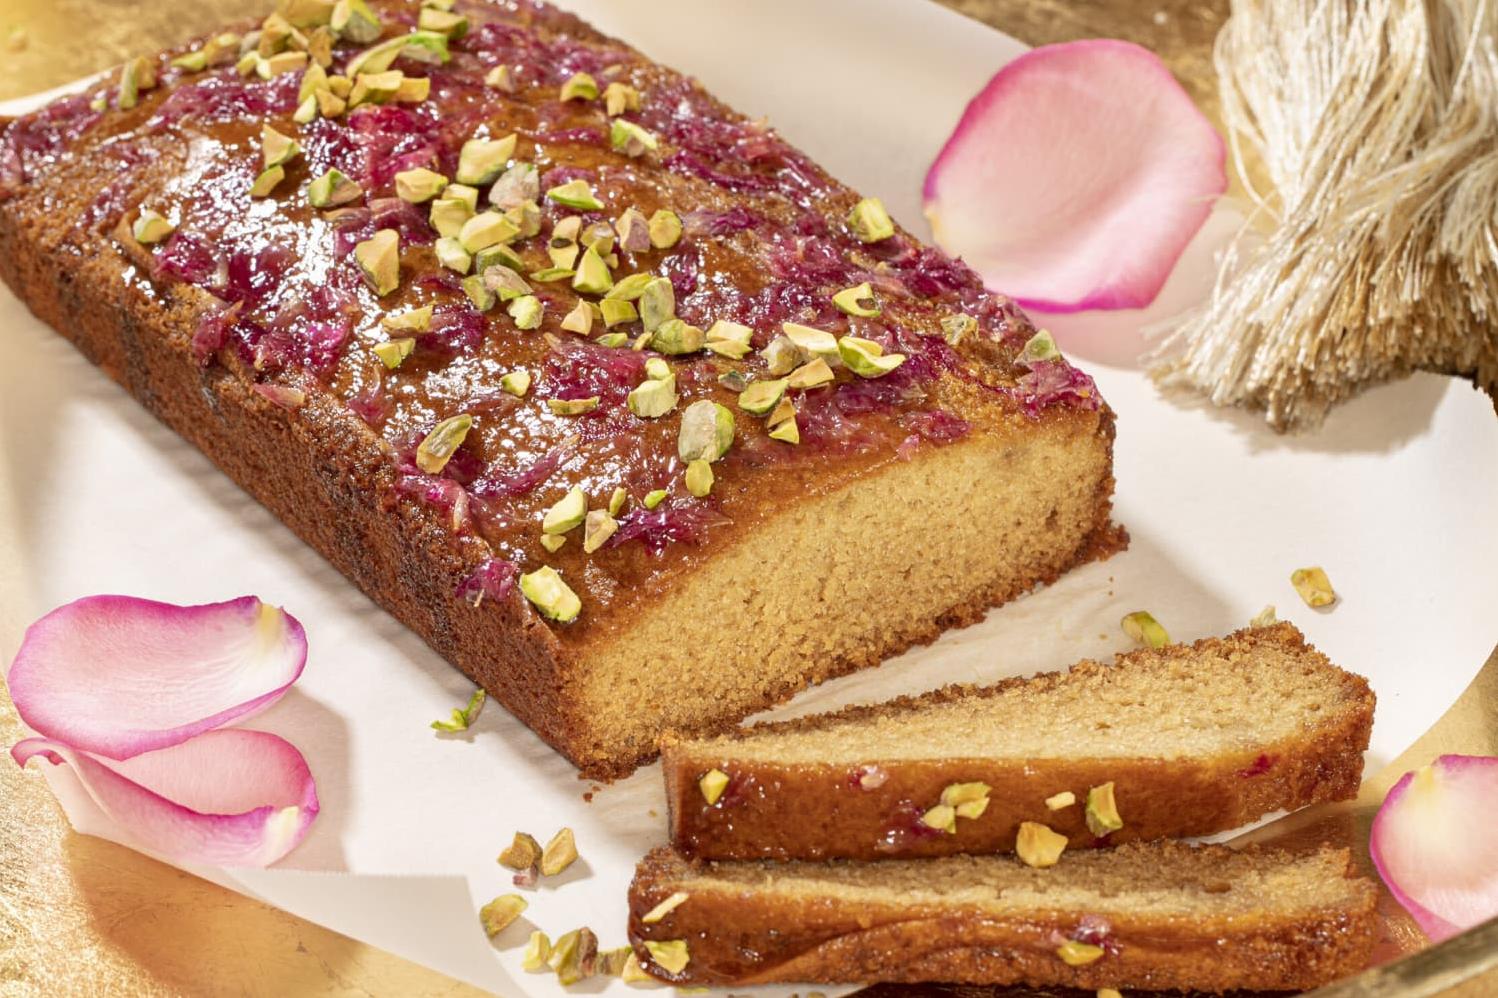  A slice of heaven, rich with the flavors of almond and rose